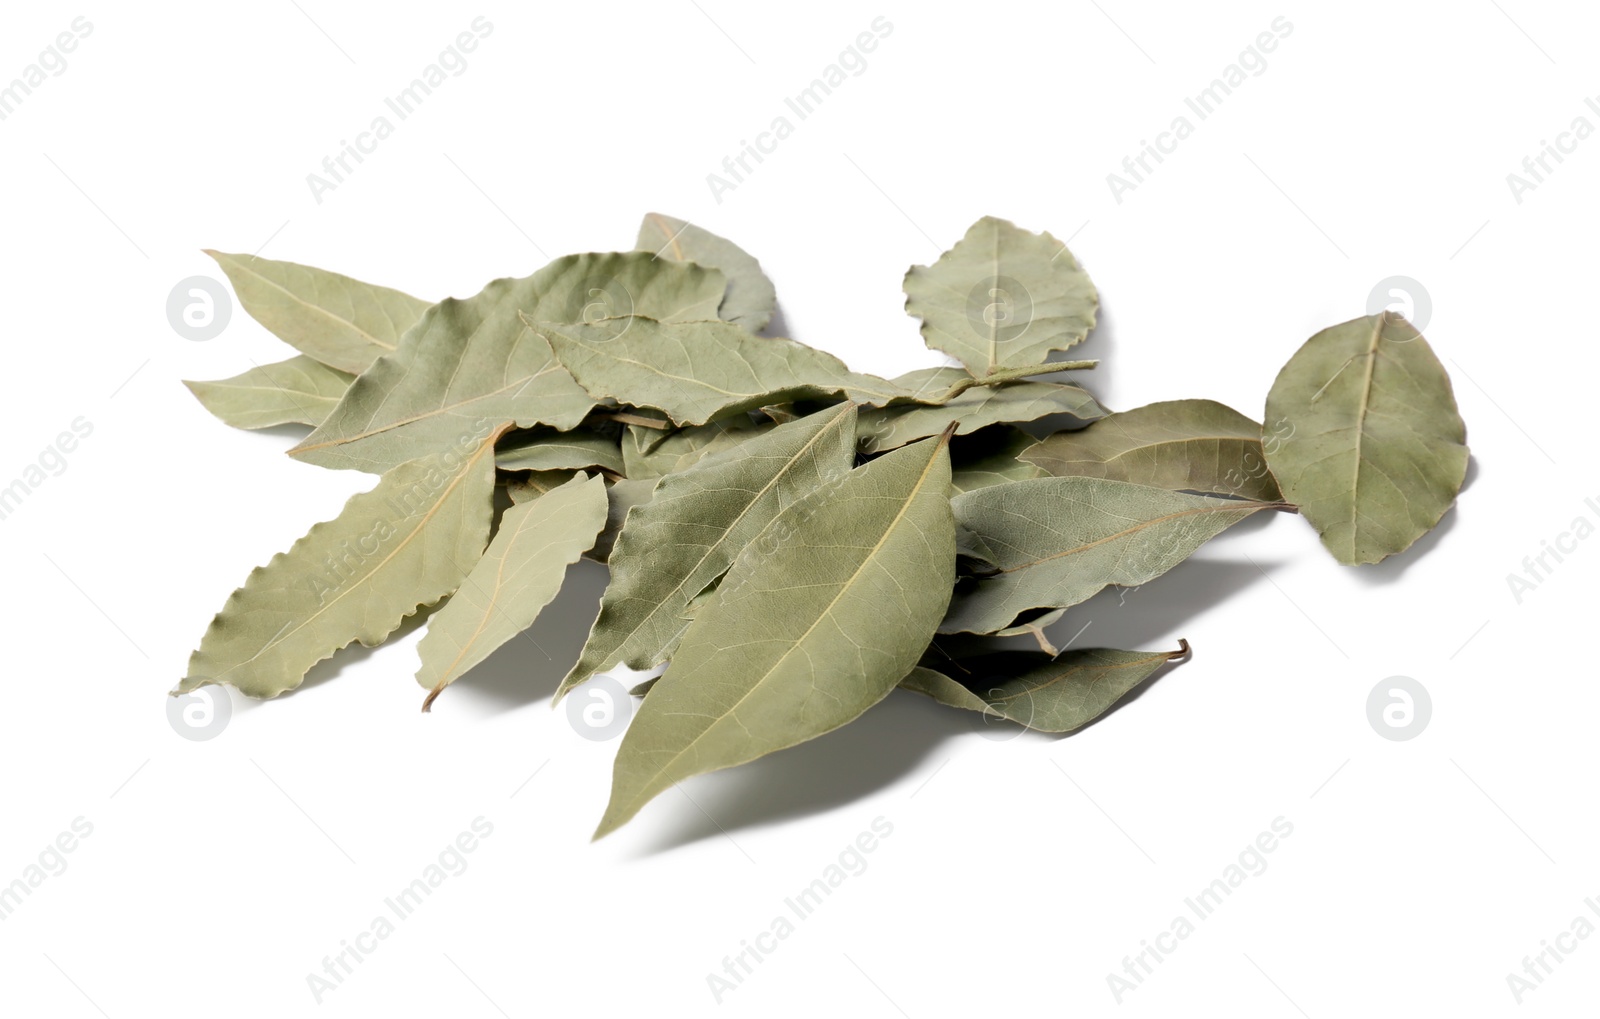 Photo of Pile of aromatic bay leaves on white background